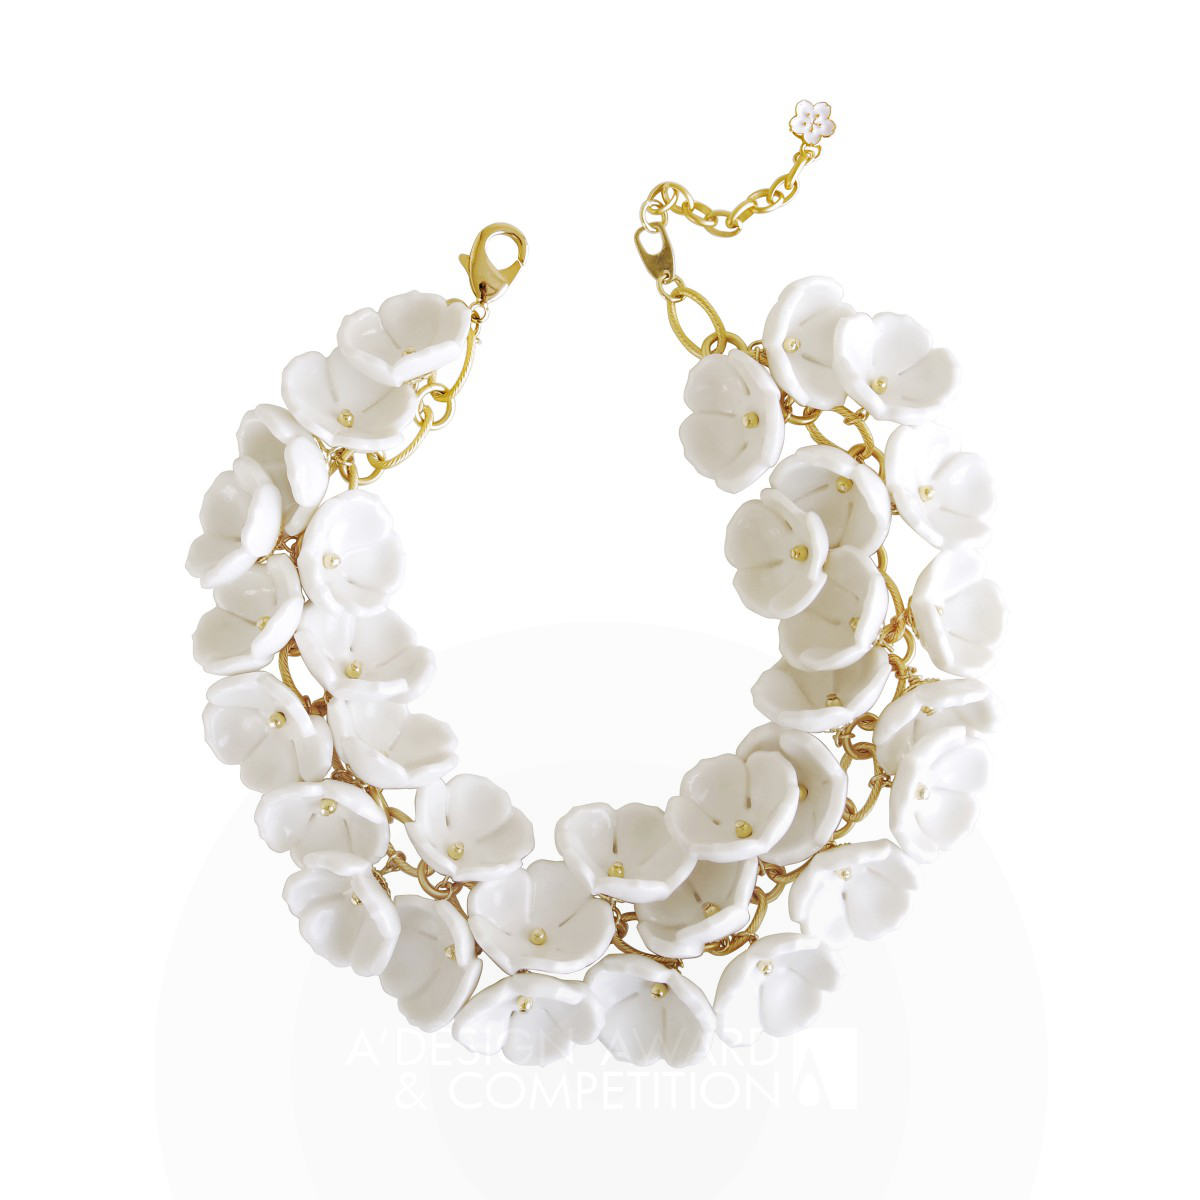 Snow White Jewellery Collection